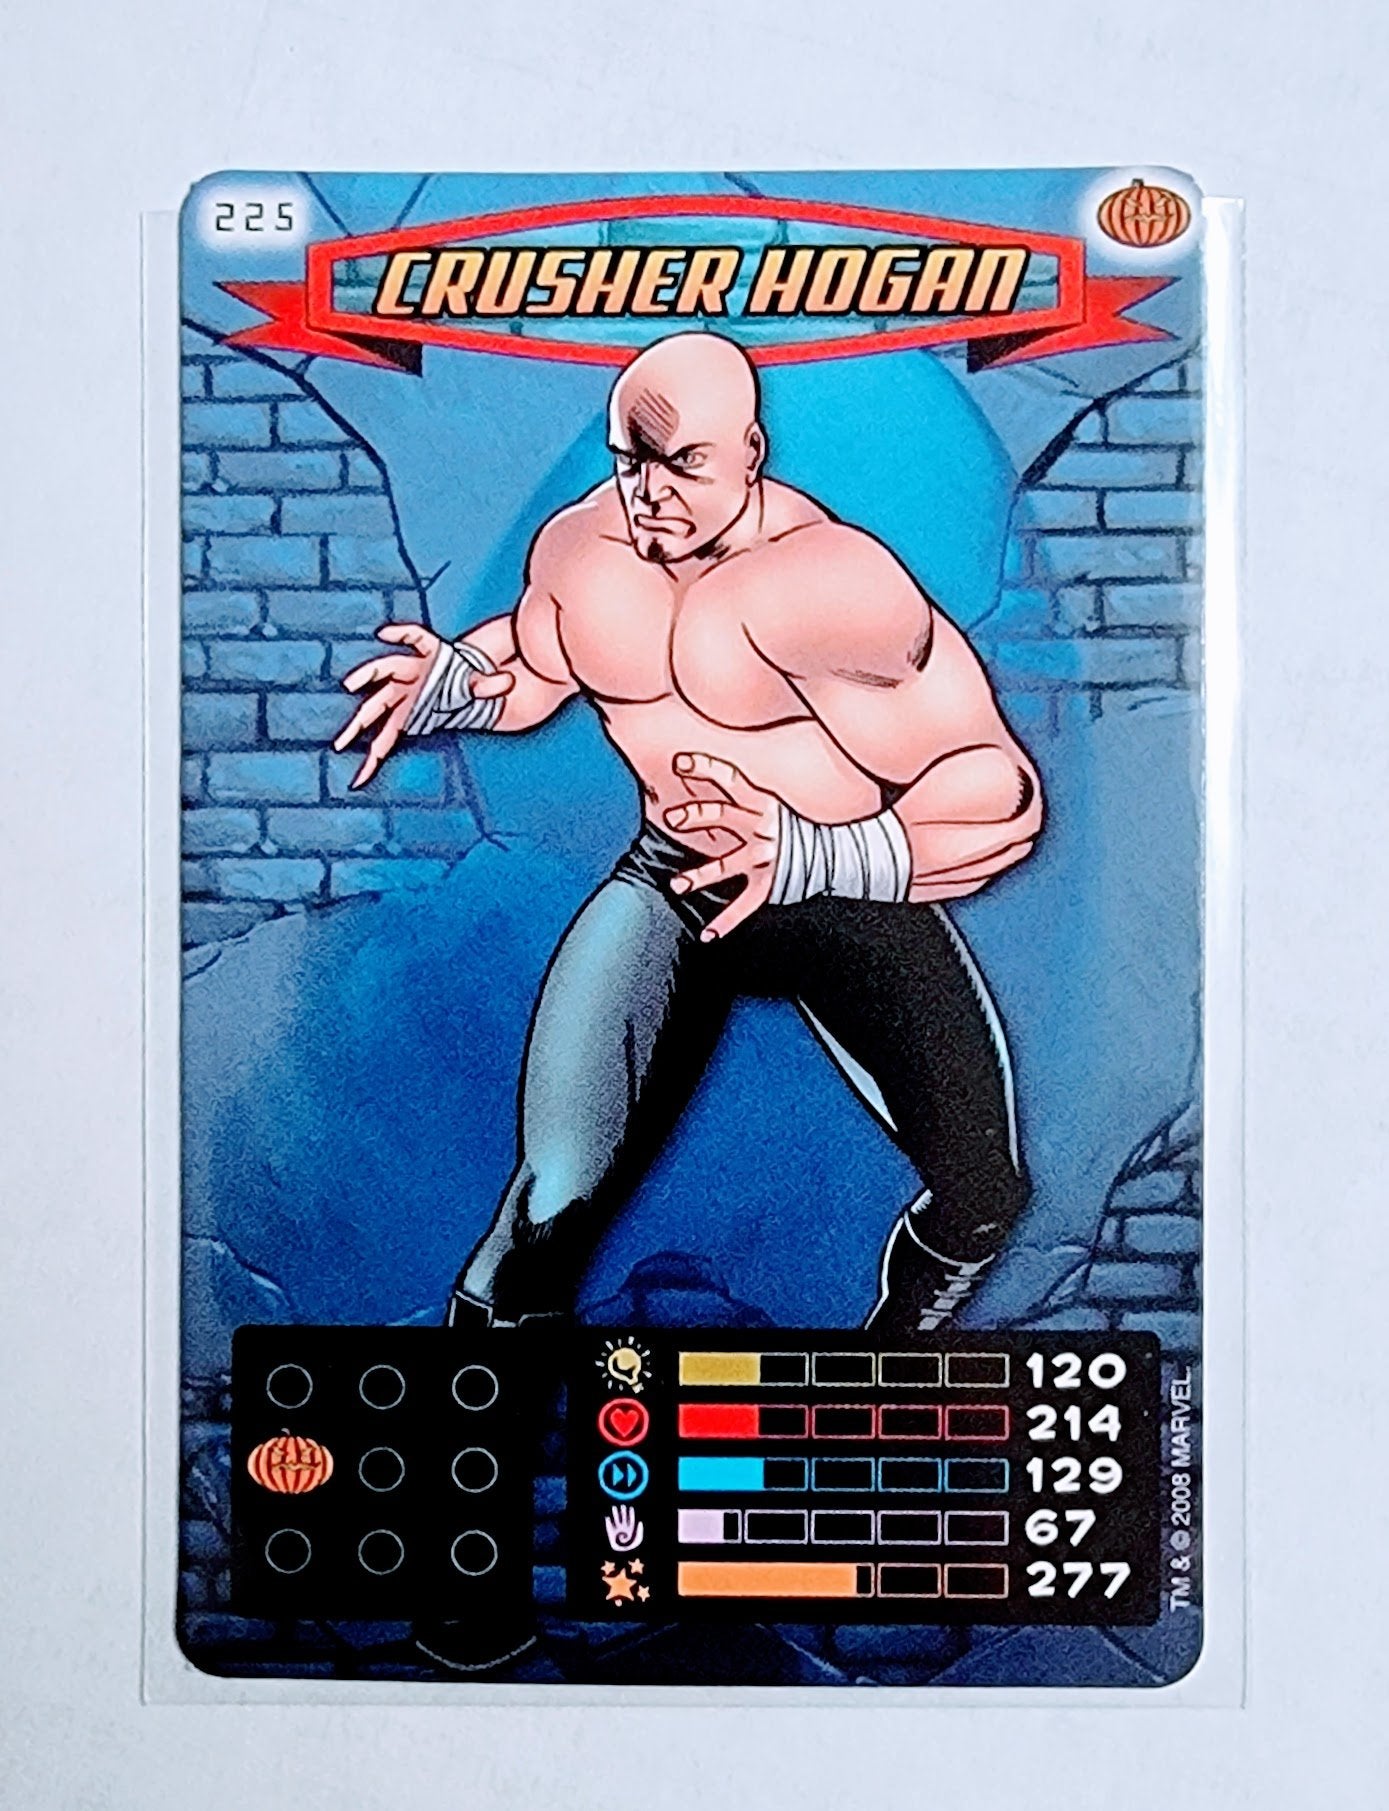 2008 Spiderman Heroes and Villains Crusher Hogan #225 Marvel Booster Trading Card UPTI simple Xclusive Collectibles   